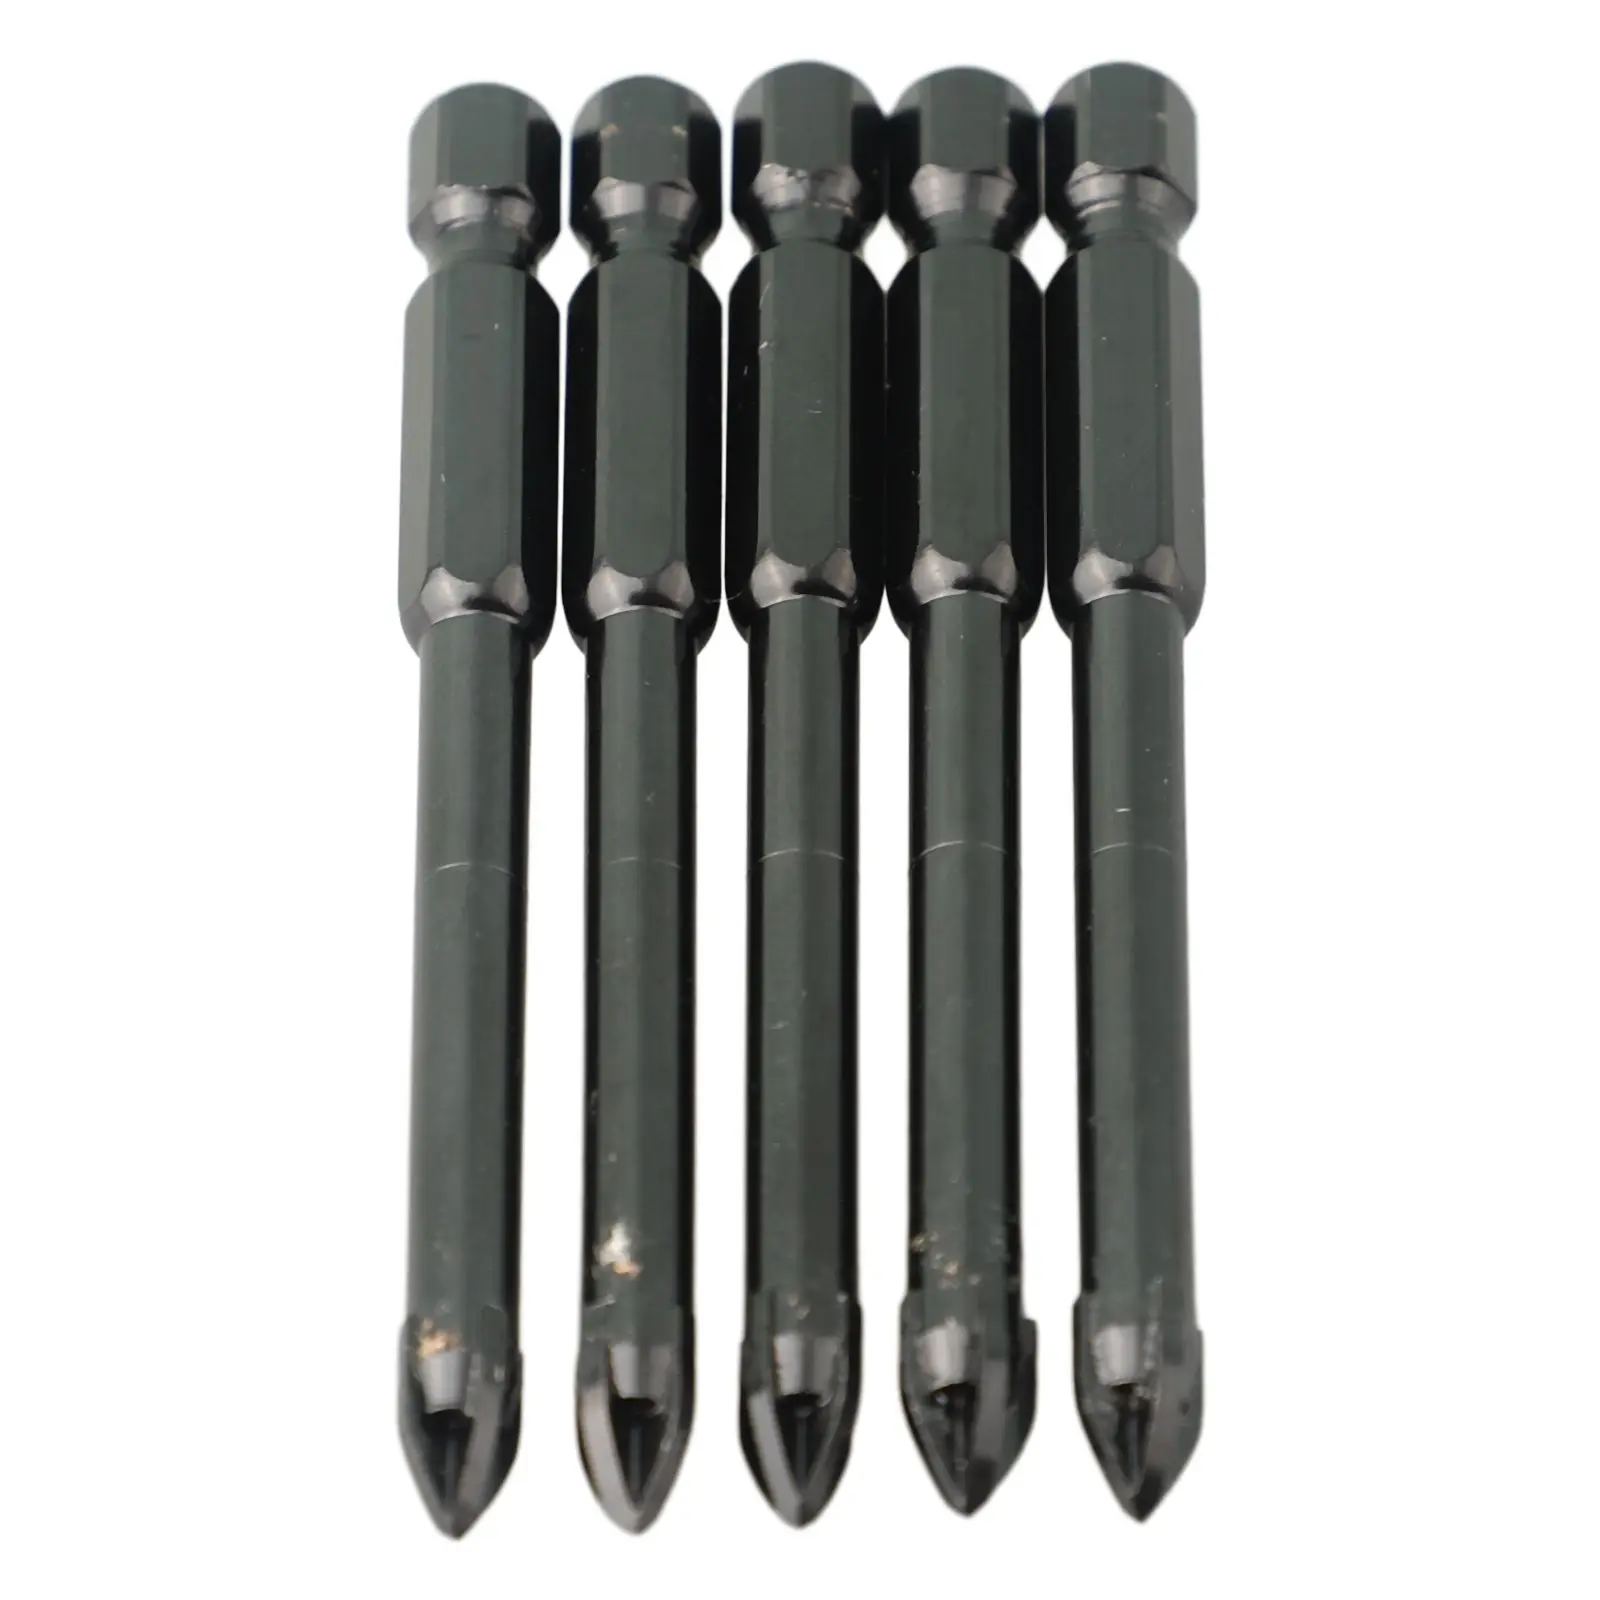 

5PC 6mm Tile Drill Bits Set For Glass Concrete Ceramic Hole Opener Drilling Tool Tungsten Carbide Triangle Bit Tool